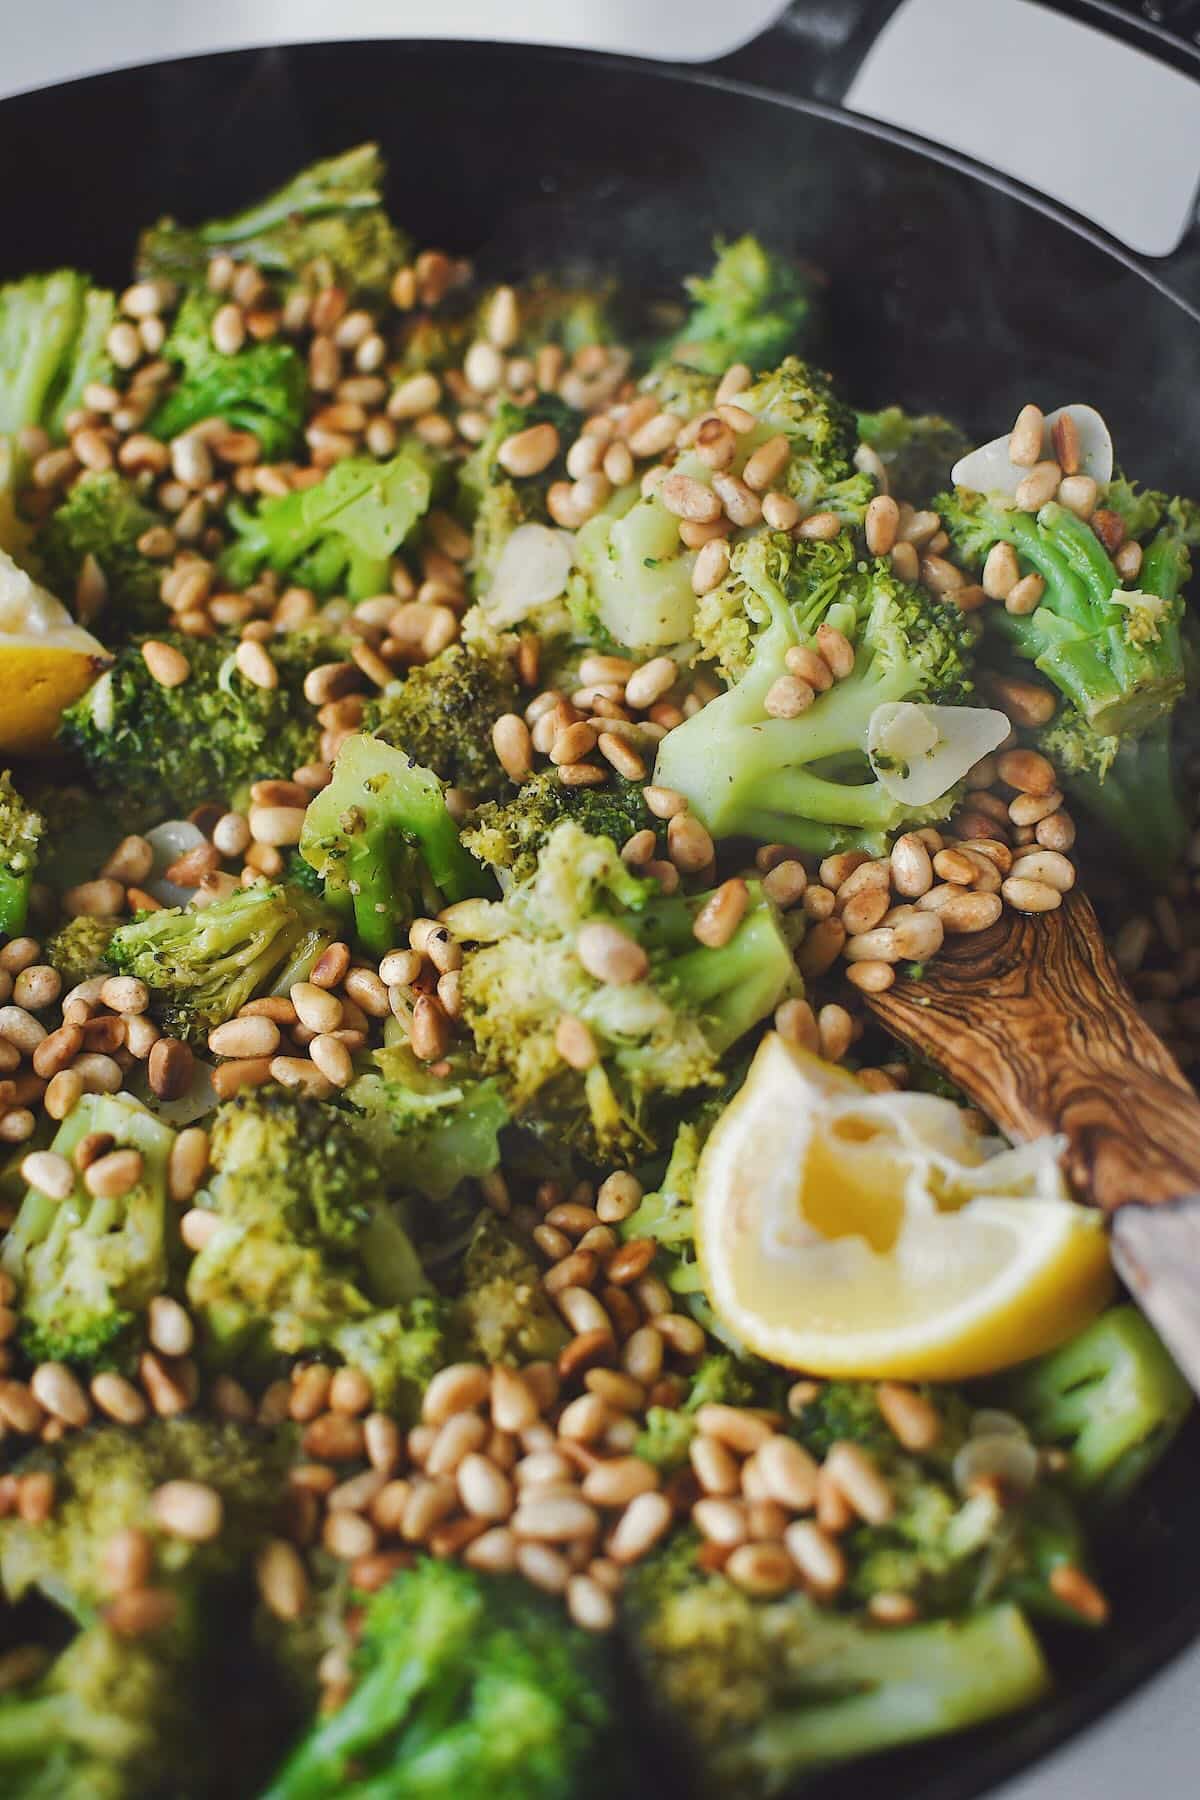 Sauteed Broccoli topped with toasted pine nuts and lemon wedges, ready to eat.